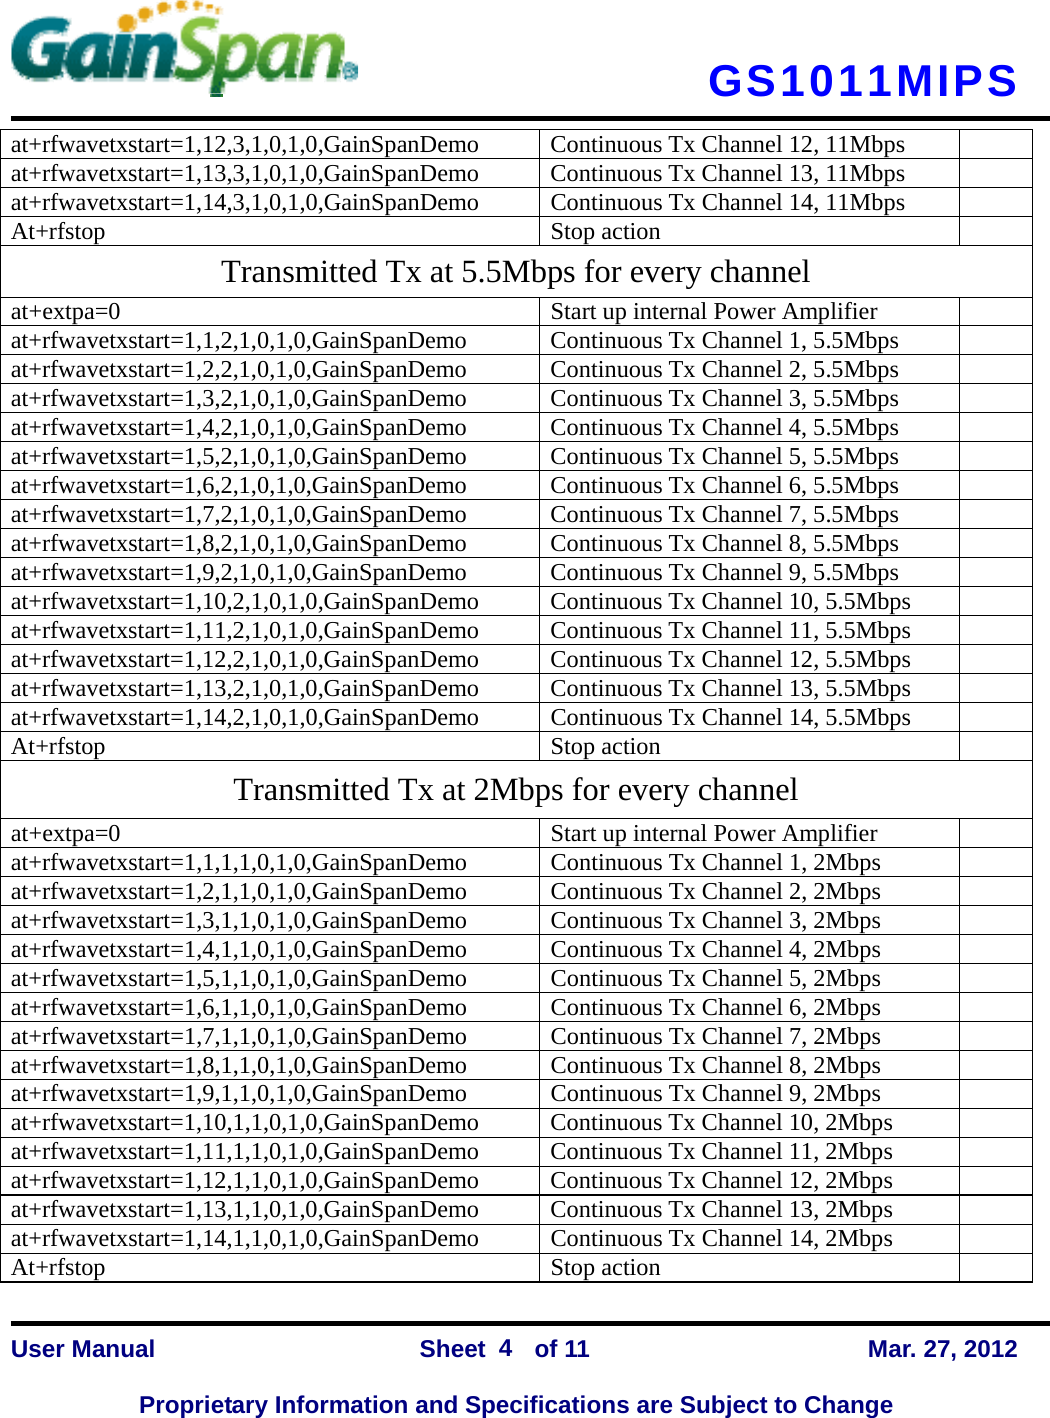      GS1011MIPS    User Manual                Sheet    of 11      Mar. 27, 2012  Proprietary Information and Specifications are Subject to Change 4 at+rfwavetxstart=1,12,3,1,0,1,0,GainSpanDemo  Continuous Tx Channel 12, 11Mbps   at+rfwavetxstart=1,13,3,1,0,1,0,GainSpanDemo  Continuous Tx Channel 13, 11Mbps   at+rfwavetxstart=1,14,3,1,0,1,0,GainSpanDemo  Continuous Tx Channel 14, 11Mbps   At+rfstop Stop action  Transmitted Tx at 5.5Mbps for every channel at+extpa=0  Start up internal Power Amplifier   at+rfwavetxstart=1,1,2,1,0,1,0,GainSpanDemo  Continuous Tx Channel 1, 5.5Mbps   at+rfwavetxstart=1,2,2,1,0,1,0,GainSpanDemo  Continuous Tx Channel 2, 5.5Mbps   at+rfwavetxstart=1,3,2,1,0,1,0,GainSpanDemo  Continuous Tx Channel 3, 5.5Mbps   at+rfwavetxstart=1,4,2,1,0,1,0,GainSpanDemo  Continuous Tx Channel 4, 5.5Mbps   at+rfwavetxstart=1,5,2,1,0,1,0,GainSpanDemo  Continuous Tx Channel 5, 5.5Mbps   at+rfwavetxstart=1,6,2,1,0,1,0,GainSpanDemo  Continuous Tx Channel 6, 5.5Mbps   at+rfwavetxstart=1,7,2,1,0,1,0,GainSpanDemo  Continuous Tx Channel 7, 5.5Mbps   at+rfwavetxstart=1,8,2,1,0,1,0,GainSpanDemo  Continuous Tx Channel 8, 5.5Mbps   at+rfwavetxstart=1,9,2,1,0,1,0,GainSpanDemo  Continuous Tx Channel 9, 5.5Mbps   at+rfwavetxstart=1,10,2,1,0,1,0,GainSpanDemo  Continuous Tx Channel 10, 5.5Mbps   at+rfwavetxstart=1,11,2,1,0,1,0,GainSpanDemo  Continuous Tx Channel 11, 5.5Mbps   at+rfwavetxstart=1,12,2,1,0,1,0,GainSpanDemo  Continuous Tx Channel 12, 5.5Mbps   at+rfwavetxstart=1,13,2,1,0,1,0,GainSpanDemo  Continuous Tx Channel 13, 5.5Mbps   at+rfwavetxstart=1,14,2,1,0,1,0,GainSpanDemo  Continuous Tx Channel 14, 5.5Mbps   At+rfstop Stop action  Transmitted Tx at 2Mbps for every channel at+extpa=0  Start up internal Power Amplifier   at+rfwavetxstart=1,1,1,1,0,1,0,GainSpanDemo  Continuous Tx Channel 1, 2Mbps   at+rfwavetxstart=1,2,1,1,0,1,0,GainSpanDemo  Continuous Tx Channel 2, 2Mbps   at+rfwavetxstart=1,3,1,1,0,1,0,GainSpanDemo  Continuous Tx Channel 3, 2Mbps   at+rfwavetxstart=1,4,1,1,0,1,0,GainSpanDemo  Continuous Tx Channel 4, 2Mbps   at+rfwavetxstart=1,5,1,1,0,1,0,GainSpanDemo  Continuous Tx Channel 5, 2Mbps   at+rfwavetxstart=1,6,1,1,0,1,0,GainSpanDemo  Continuous Tx Channel 6, 2Mbps   at+rfwavetxstart=1,7,1,1,0,1,0,GainSpanDemo  Continuous Tx Channel 7, 2Mbps   at+rfwavetxstart=1,8,1,1,0,1,0,GainSpanDemo  Continuous Tx Channel 8, 2Mbps   at+rfwavetxstart=1,9,1,1,0,1,0,GainSpanDemo  Continuous Tx Channel 9, 2Mbps   at+rfwavetxstart=1,10,1,1,0,1,0,GainSpanDemo  Continuous Tx Channel 10, 2Mbps   at+rfwavetxstart=1,11,1,1,0,1,0,GainSpanDemo  Continuous Tx Channel 11, 2Mbps   at+rfwavetxstart=1,12,1,1,0,1,0,GainSpanDemo  Continuous Tx Channel 12, 2Mbps   at+rfwavetxstart=1,13,1,1,0,1,0,GainSpanDemo  Continuous Tx Channel 13, 2Mbps   at+rfwavetxstart=1,14,1,1,0,1,0,GainSpanDemo  Continuous Tx Channel 14, 2Mbps   At+rfstop Stop action  